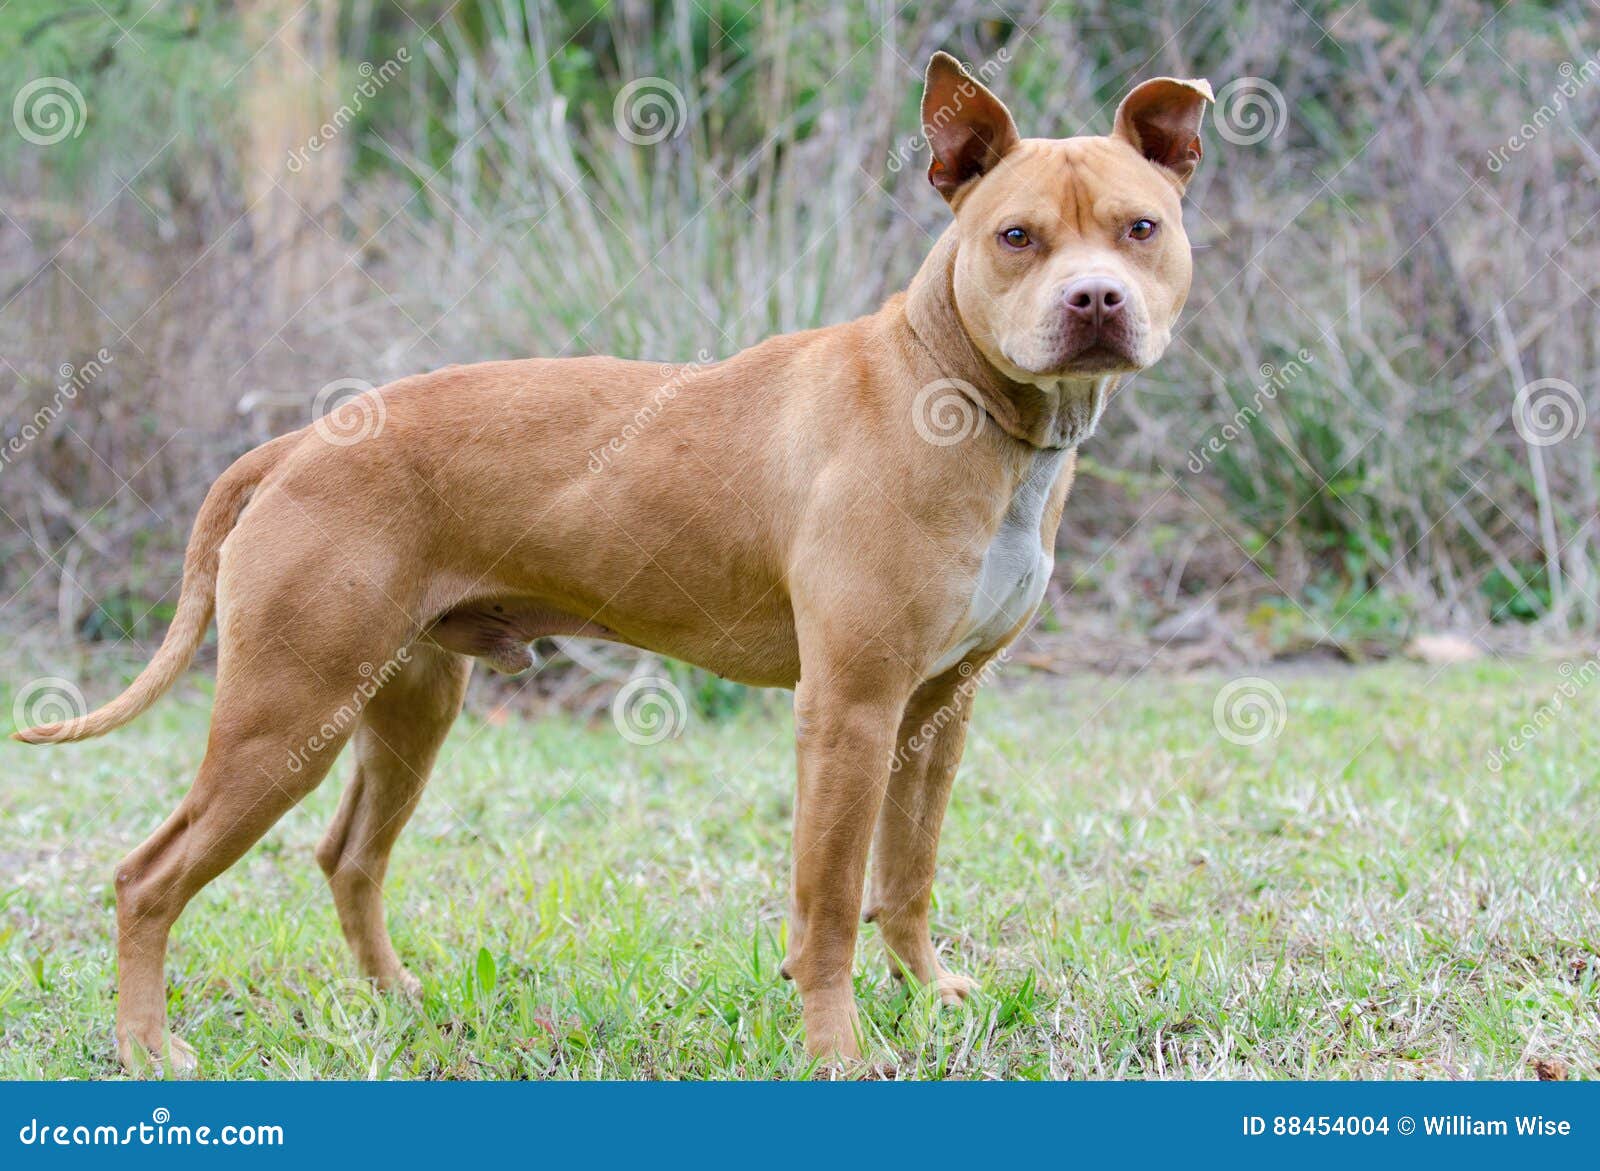 Rednose Pitbull Terrier Dog Stock Photo Image Of Puppy Adopt 88454004